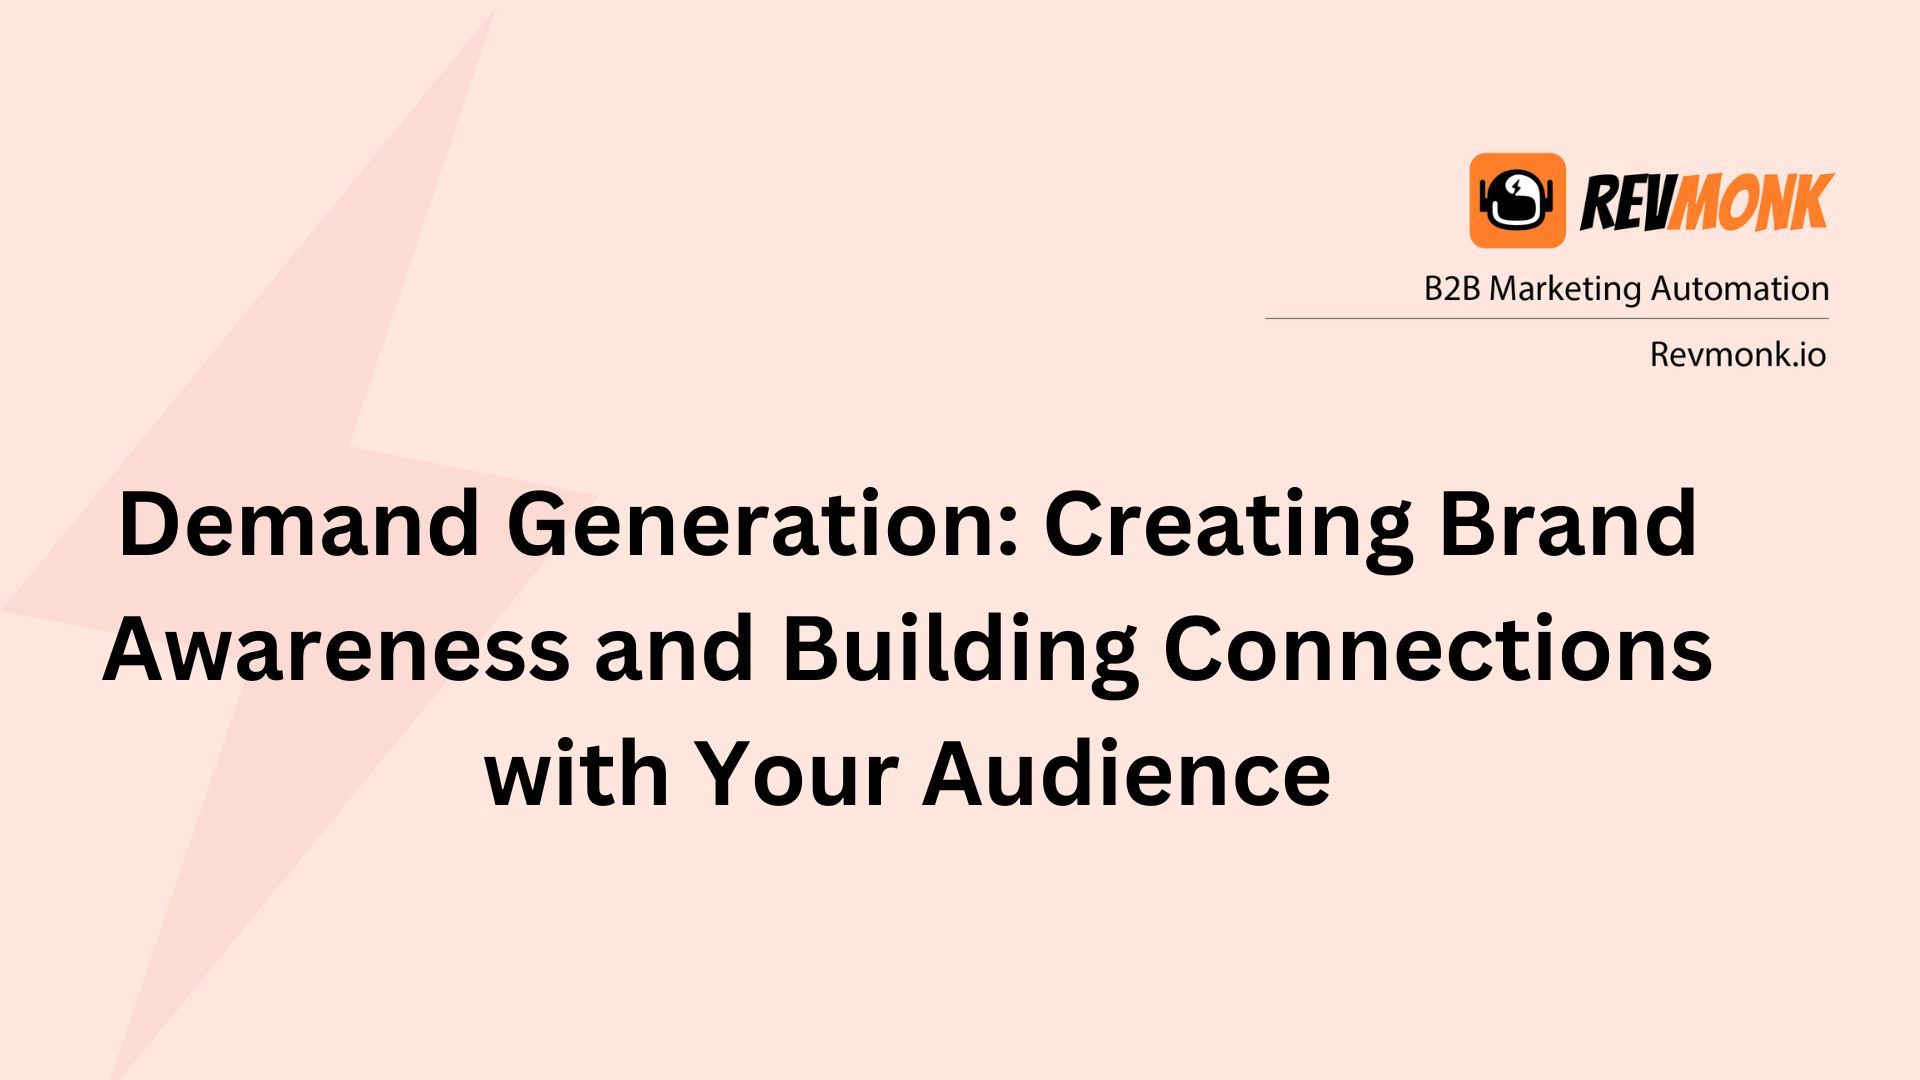 Demand Generation: Creating Brand Awareness and Building Connections with Your Audience